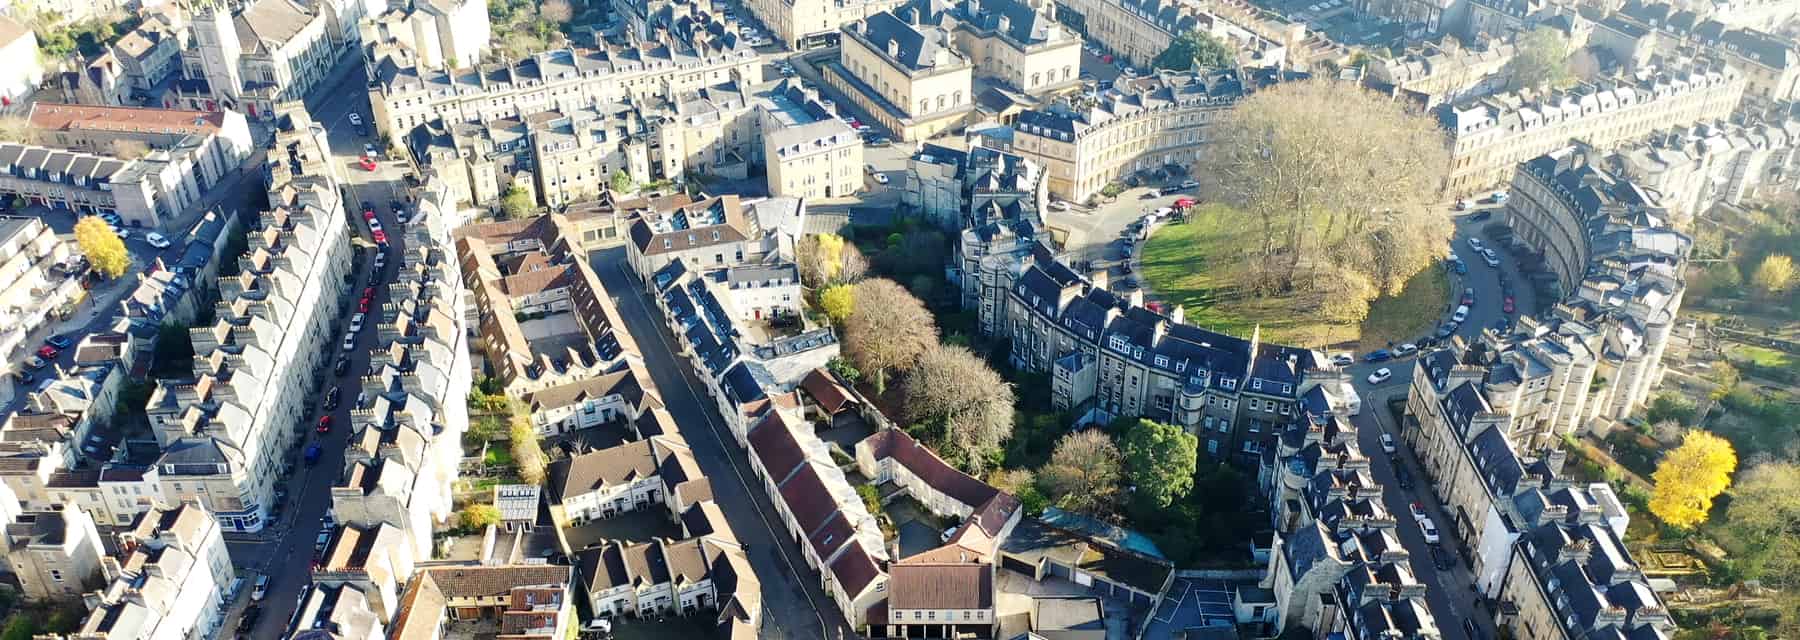 the royal crescent in bath city england